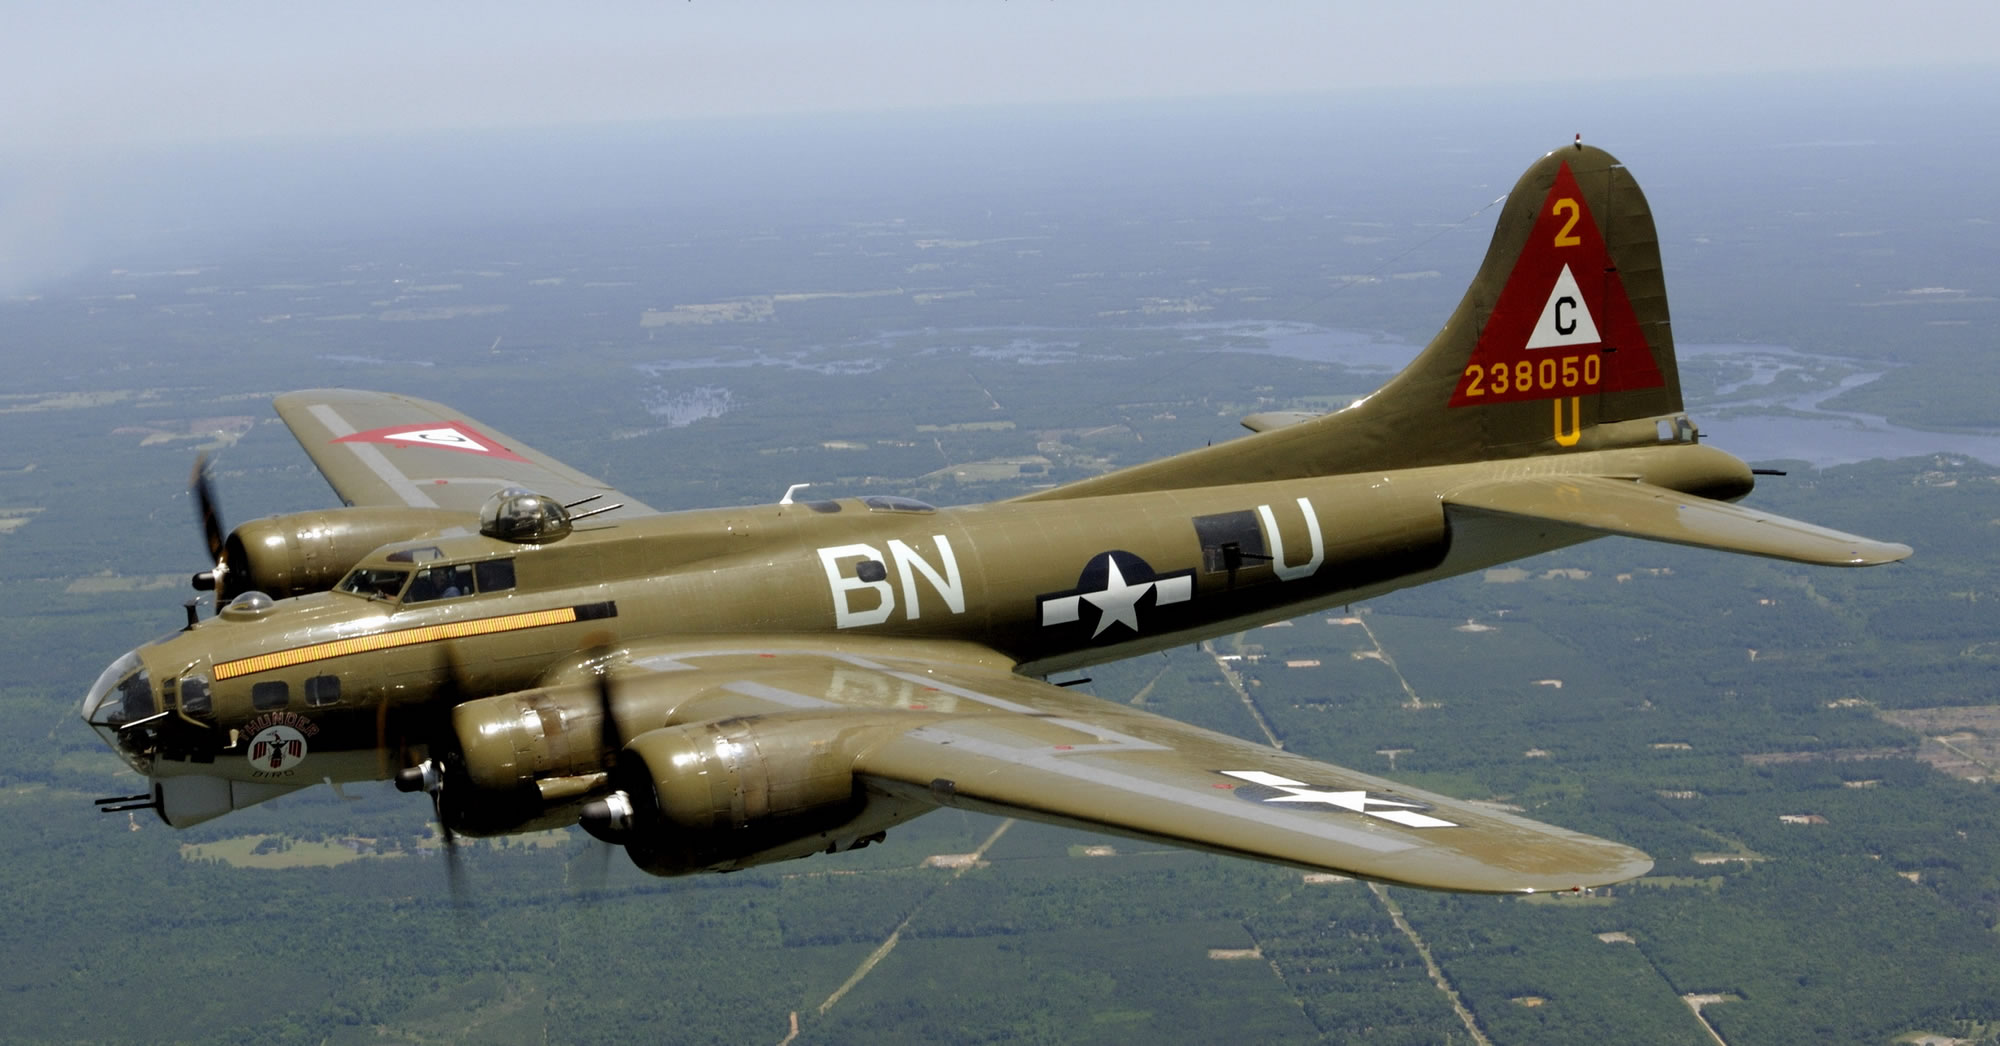 Boeing B-17 Flying Fortress Backgrounds, Compatible - PC, Mobile, Gadgets| 2000x1046 px